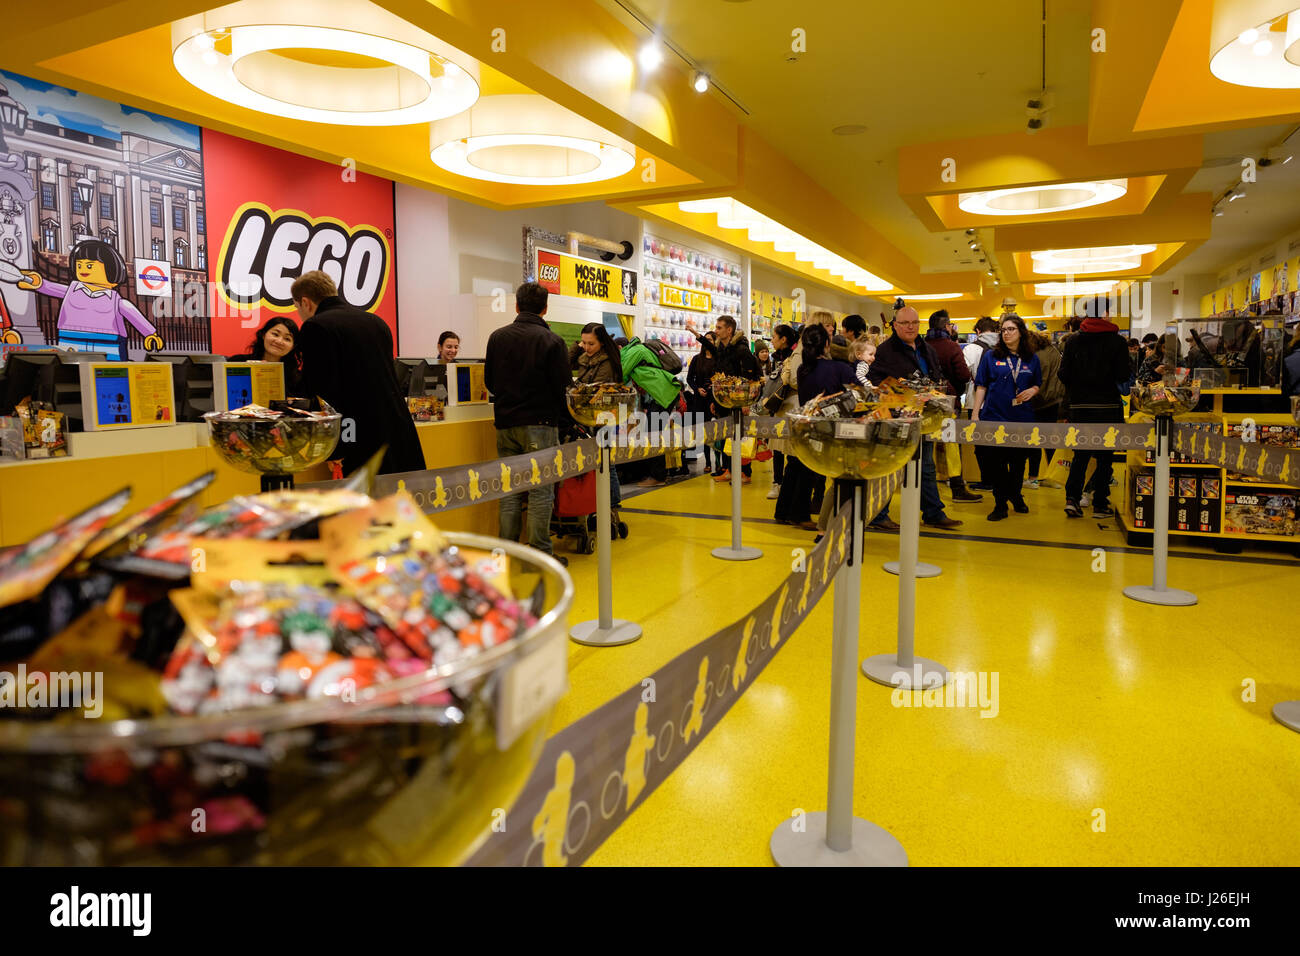 The Lego store at Leicester Square, London, England, UK, Europe Stock Photo  - Alamy